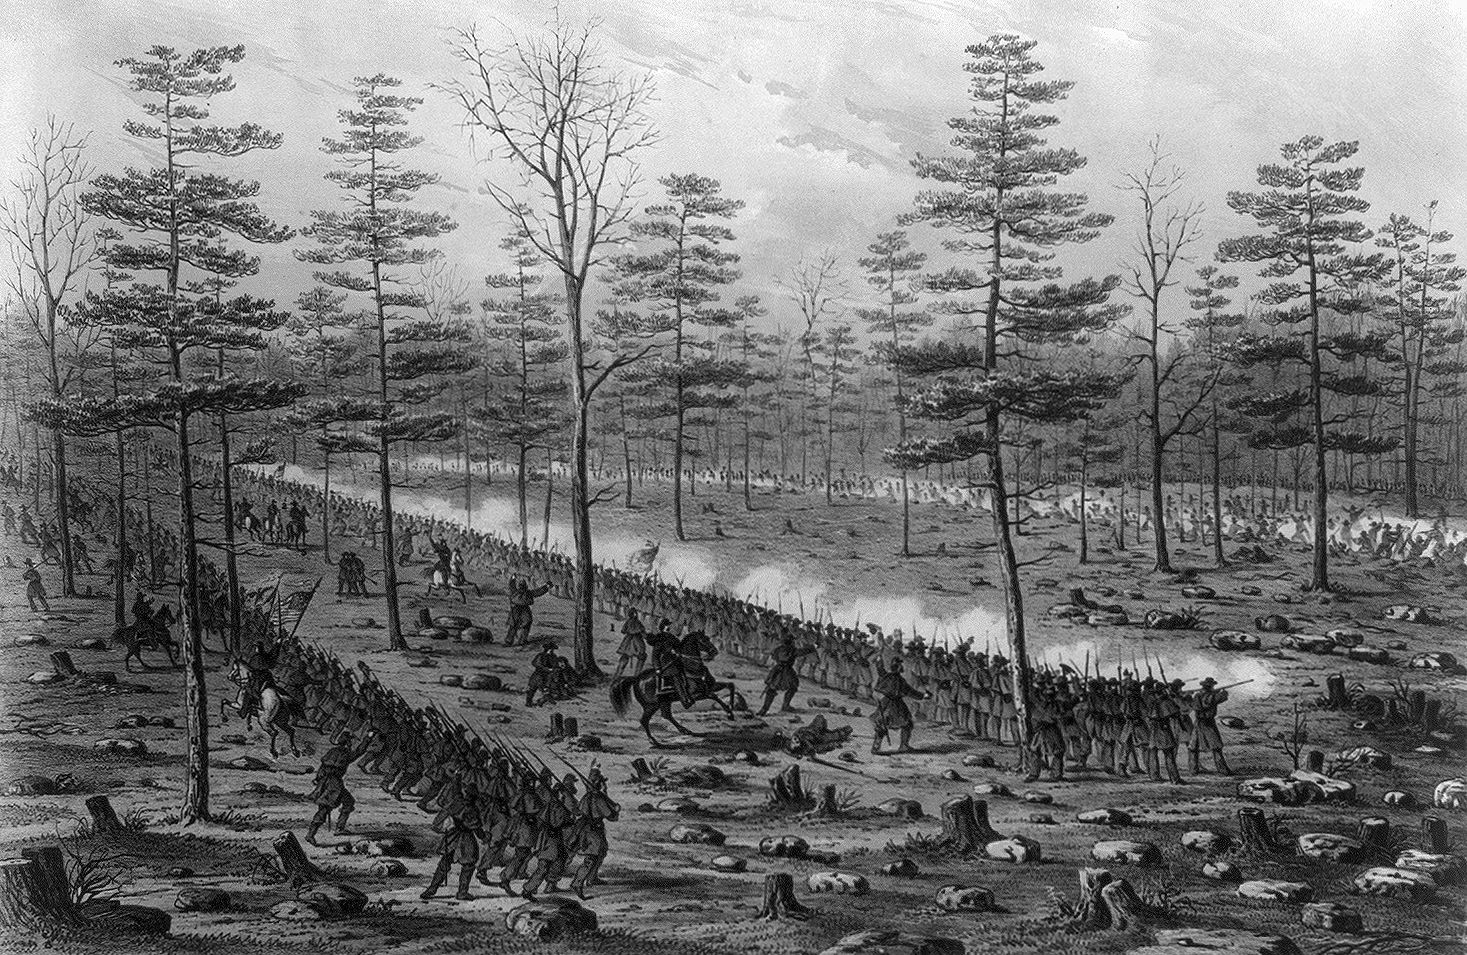 Brigadier General Samuel Beatty’s Union brigade sweeps through the denuded forest at Stones River.